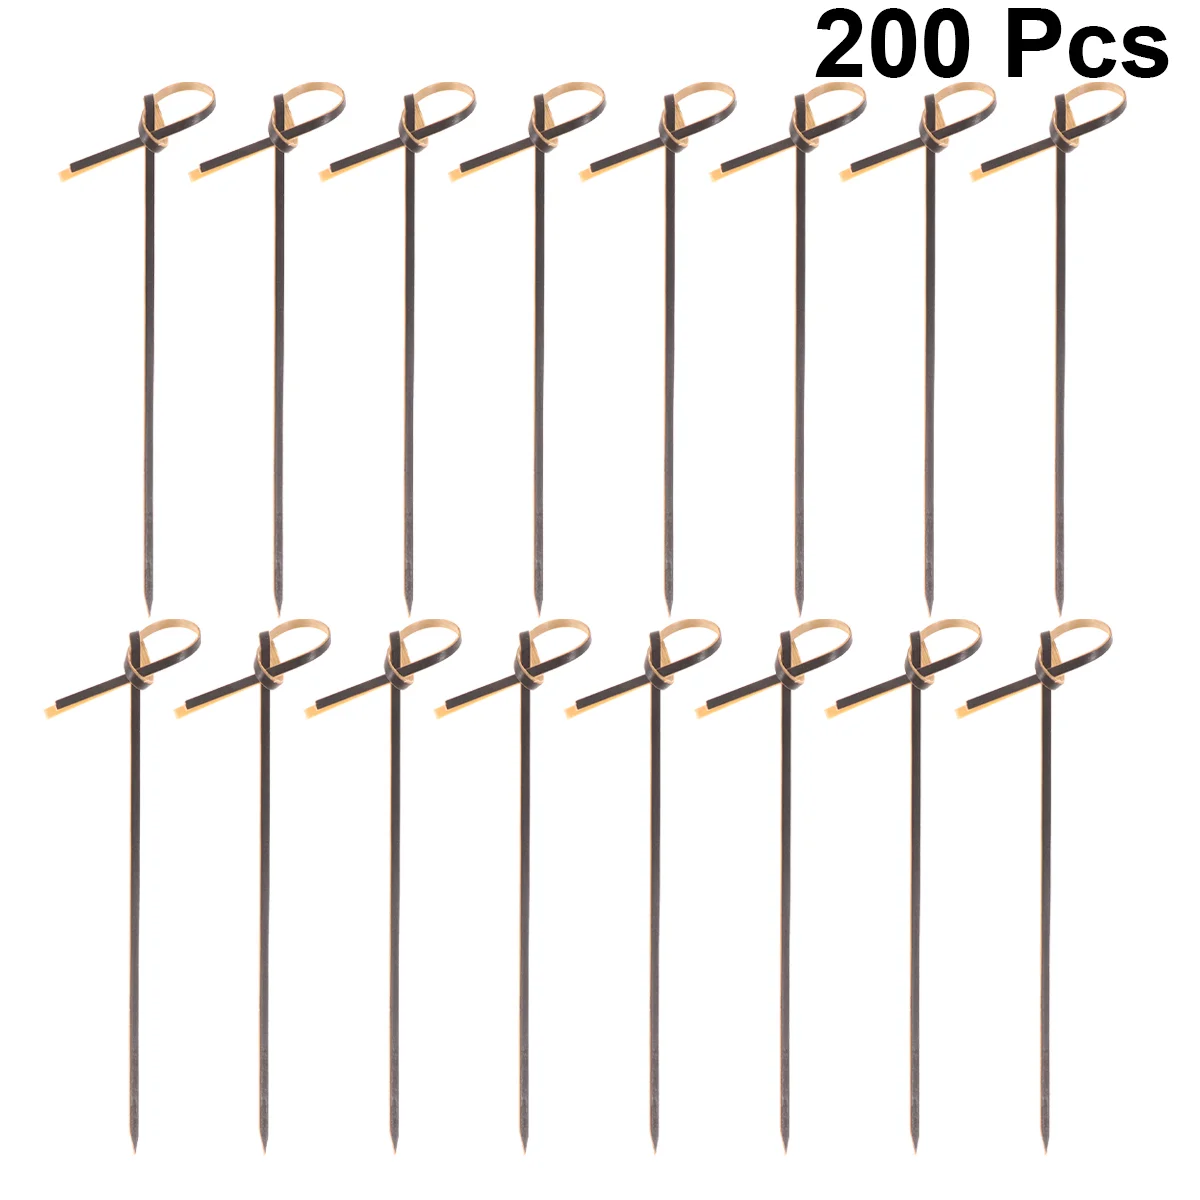 

Picks Cocktail Toothpicks Skewers Fruit Sticks Appetizer Pick Toothpick Party Knot Appetizers Sandwich Bamboo Looped Wooden